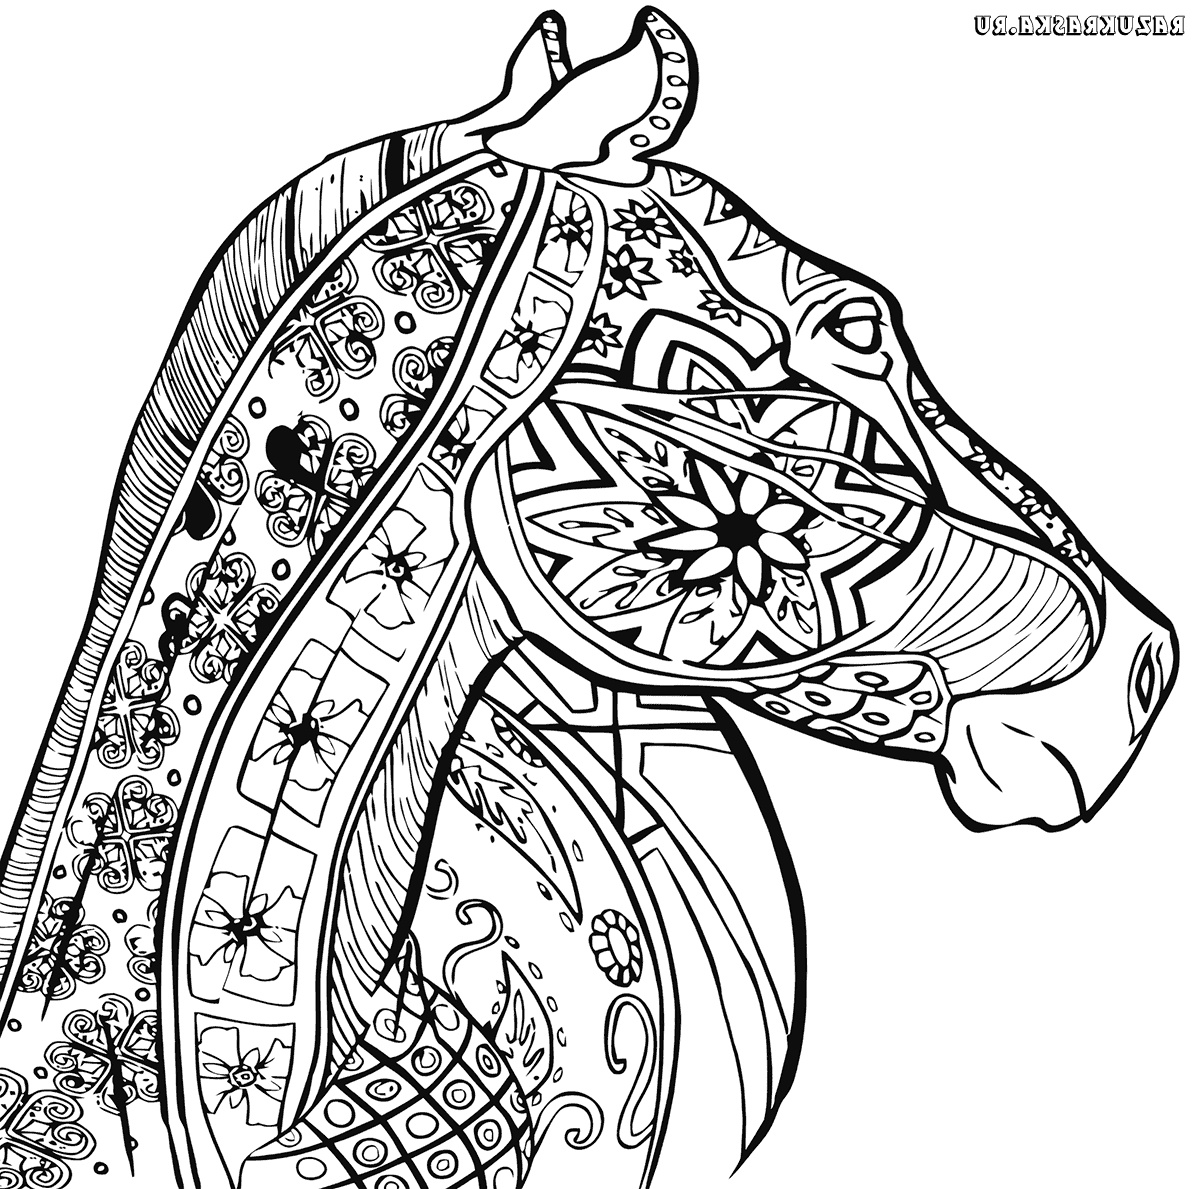 Coloriage Antistress Inspirant Images Coloriage Anti Stress Cheval